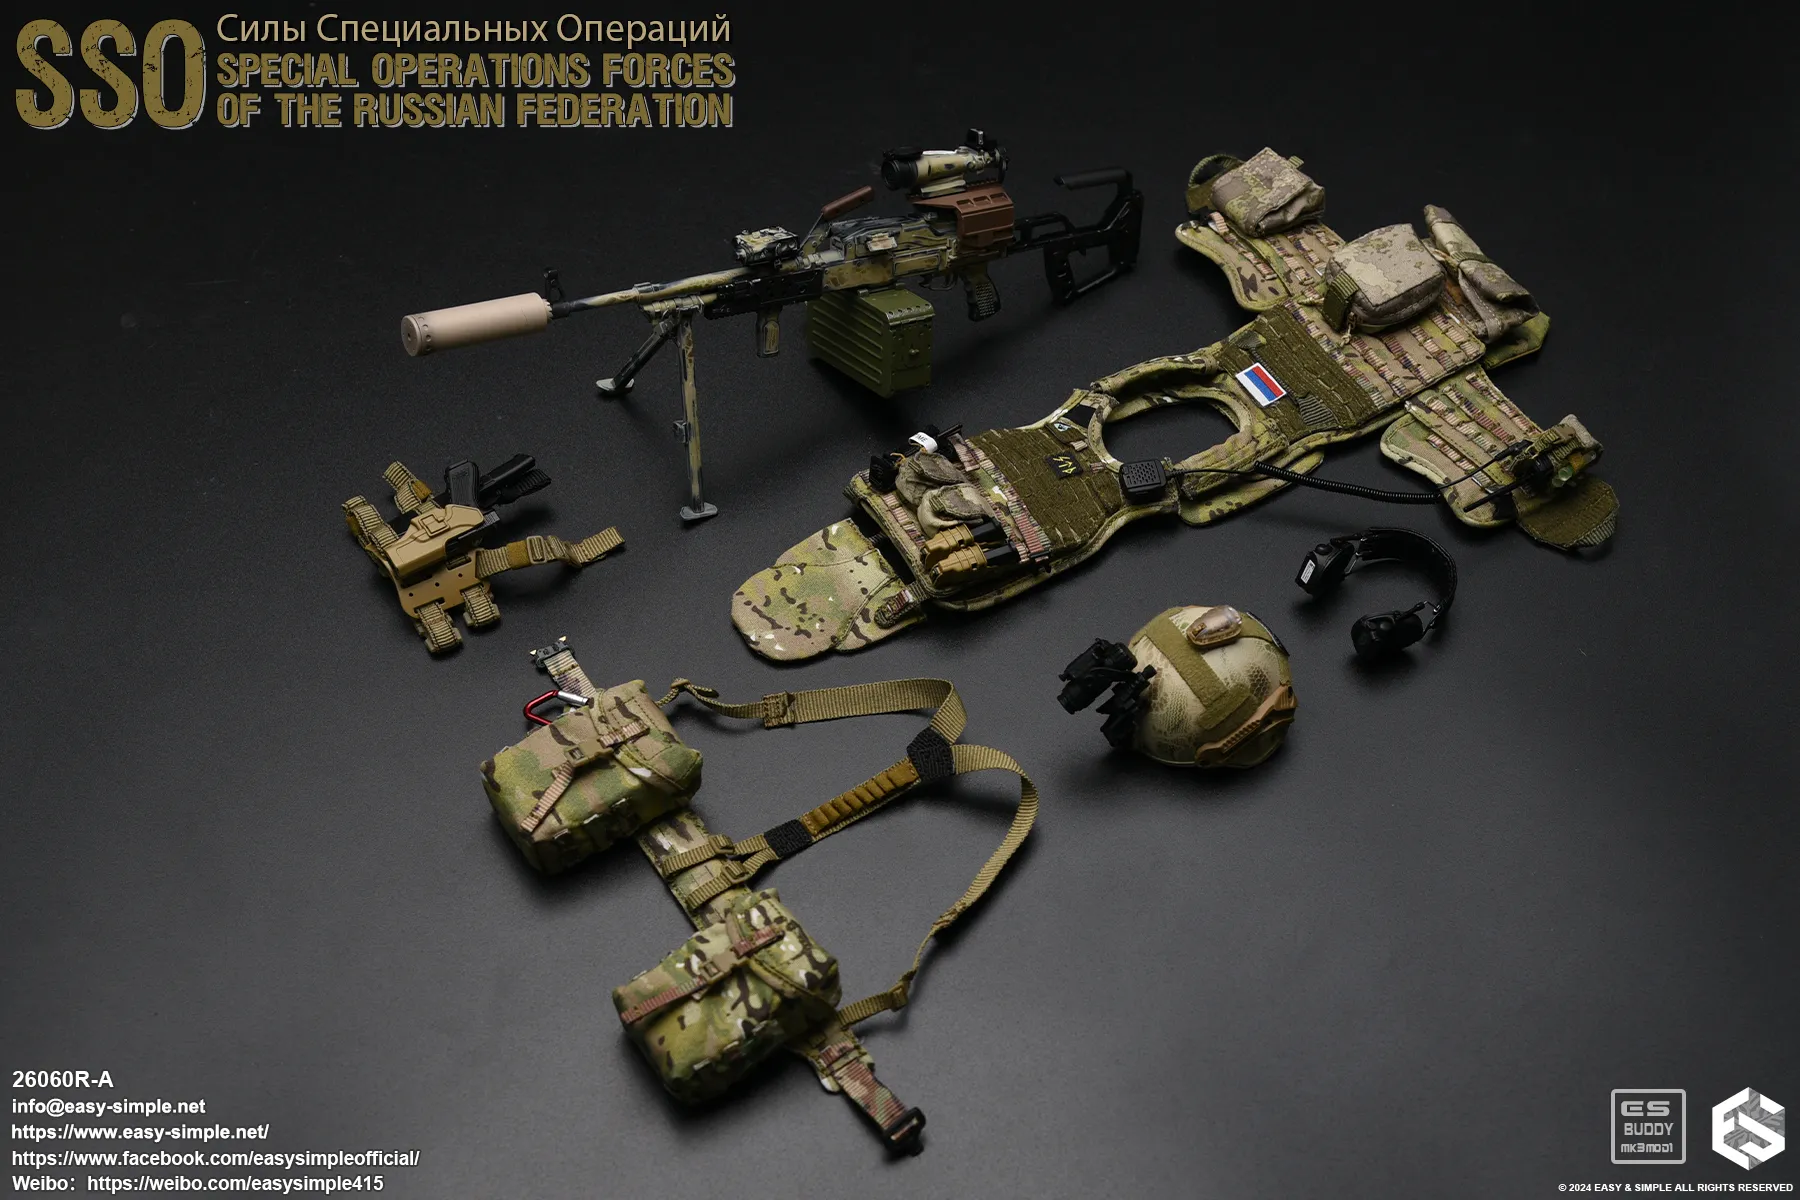 russian - NEW PRODUCT: Easy&Simple 26060R-A Russian Special Operations Forces (SSO) Format,webp